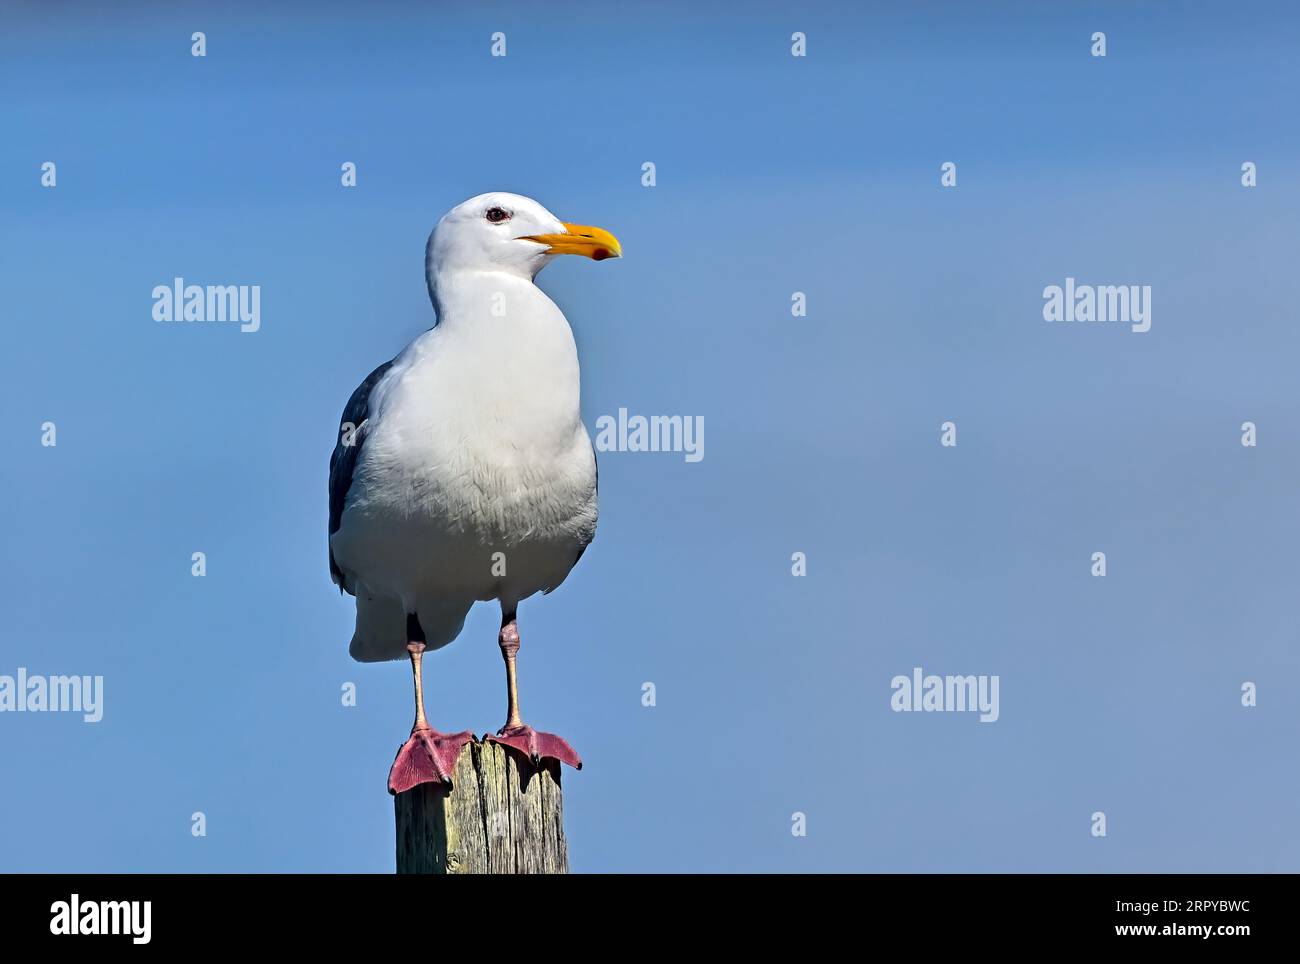 A Glaucous-Winged Gull 'Larus hyperboreus',  standing on a post in Nanaimo Vancouver Island British Columbia Canada Stock Photo